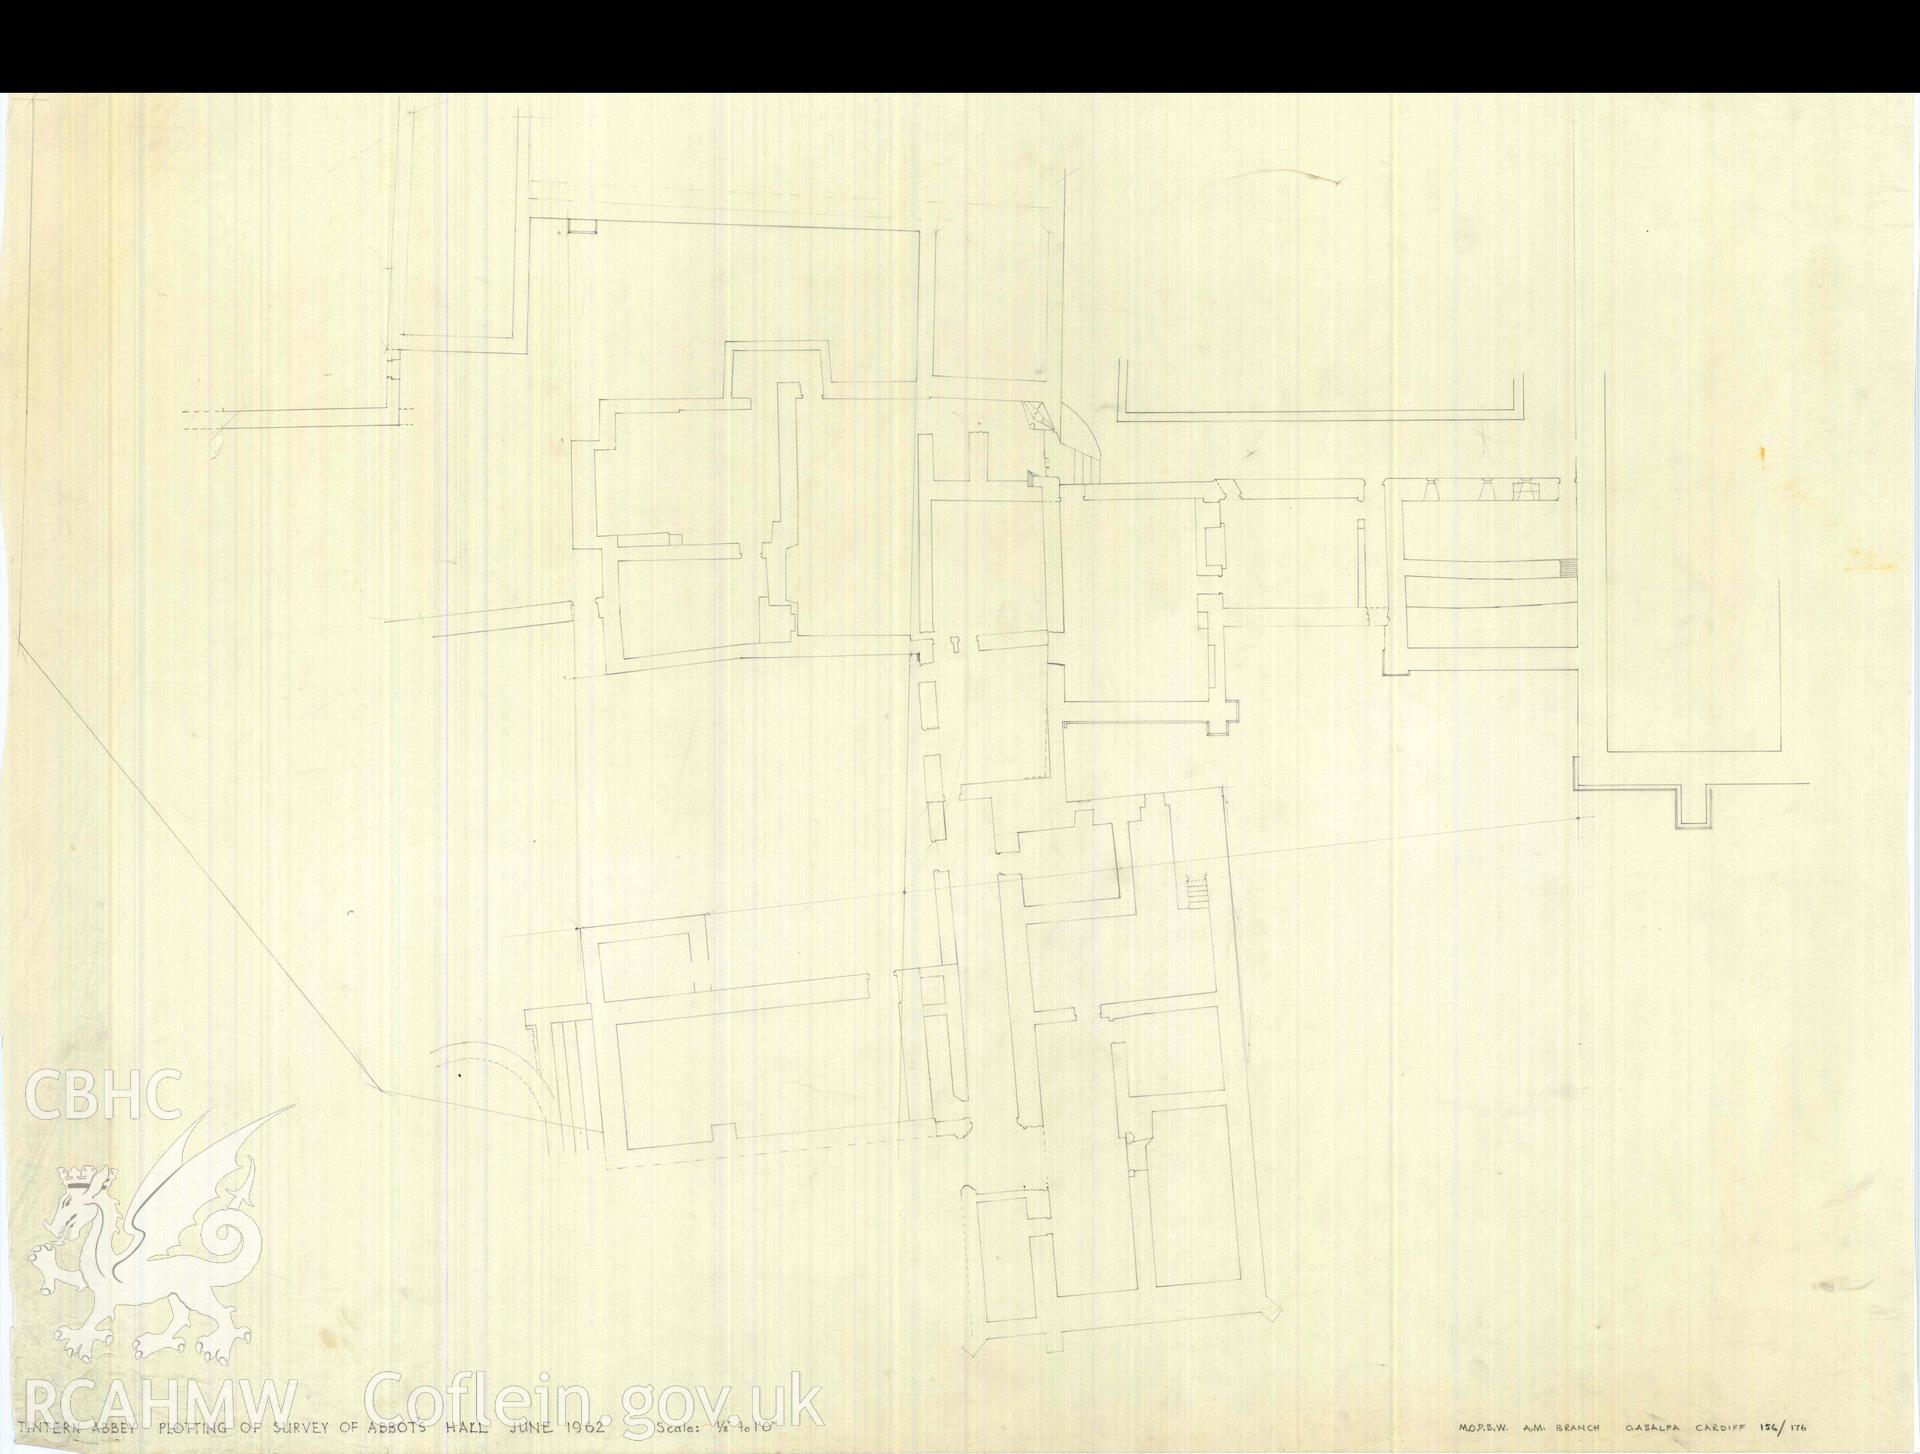 Cadw guardianship monument drawing of Tintern Abbey. Plotting of survey of Abbot's Hall. Cadw ref. No. 156/176. Scale 1:96.